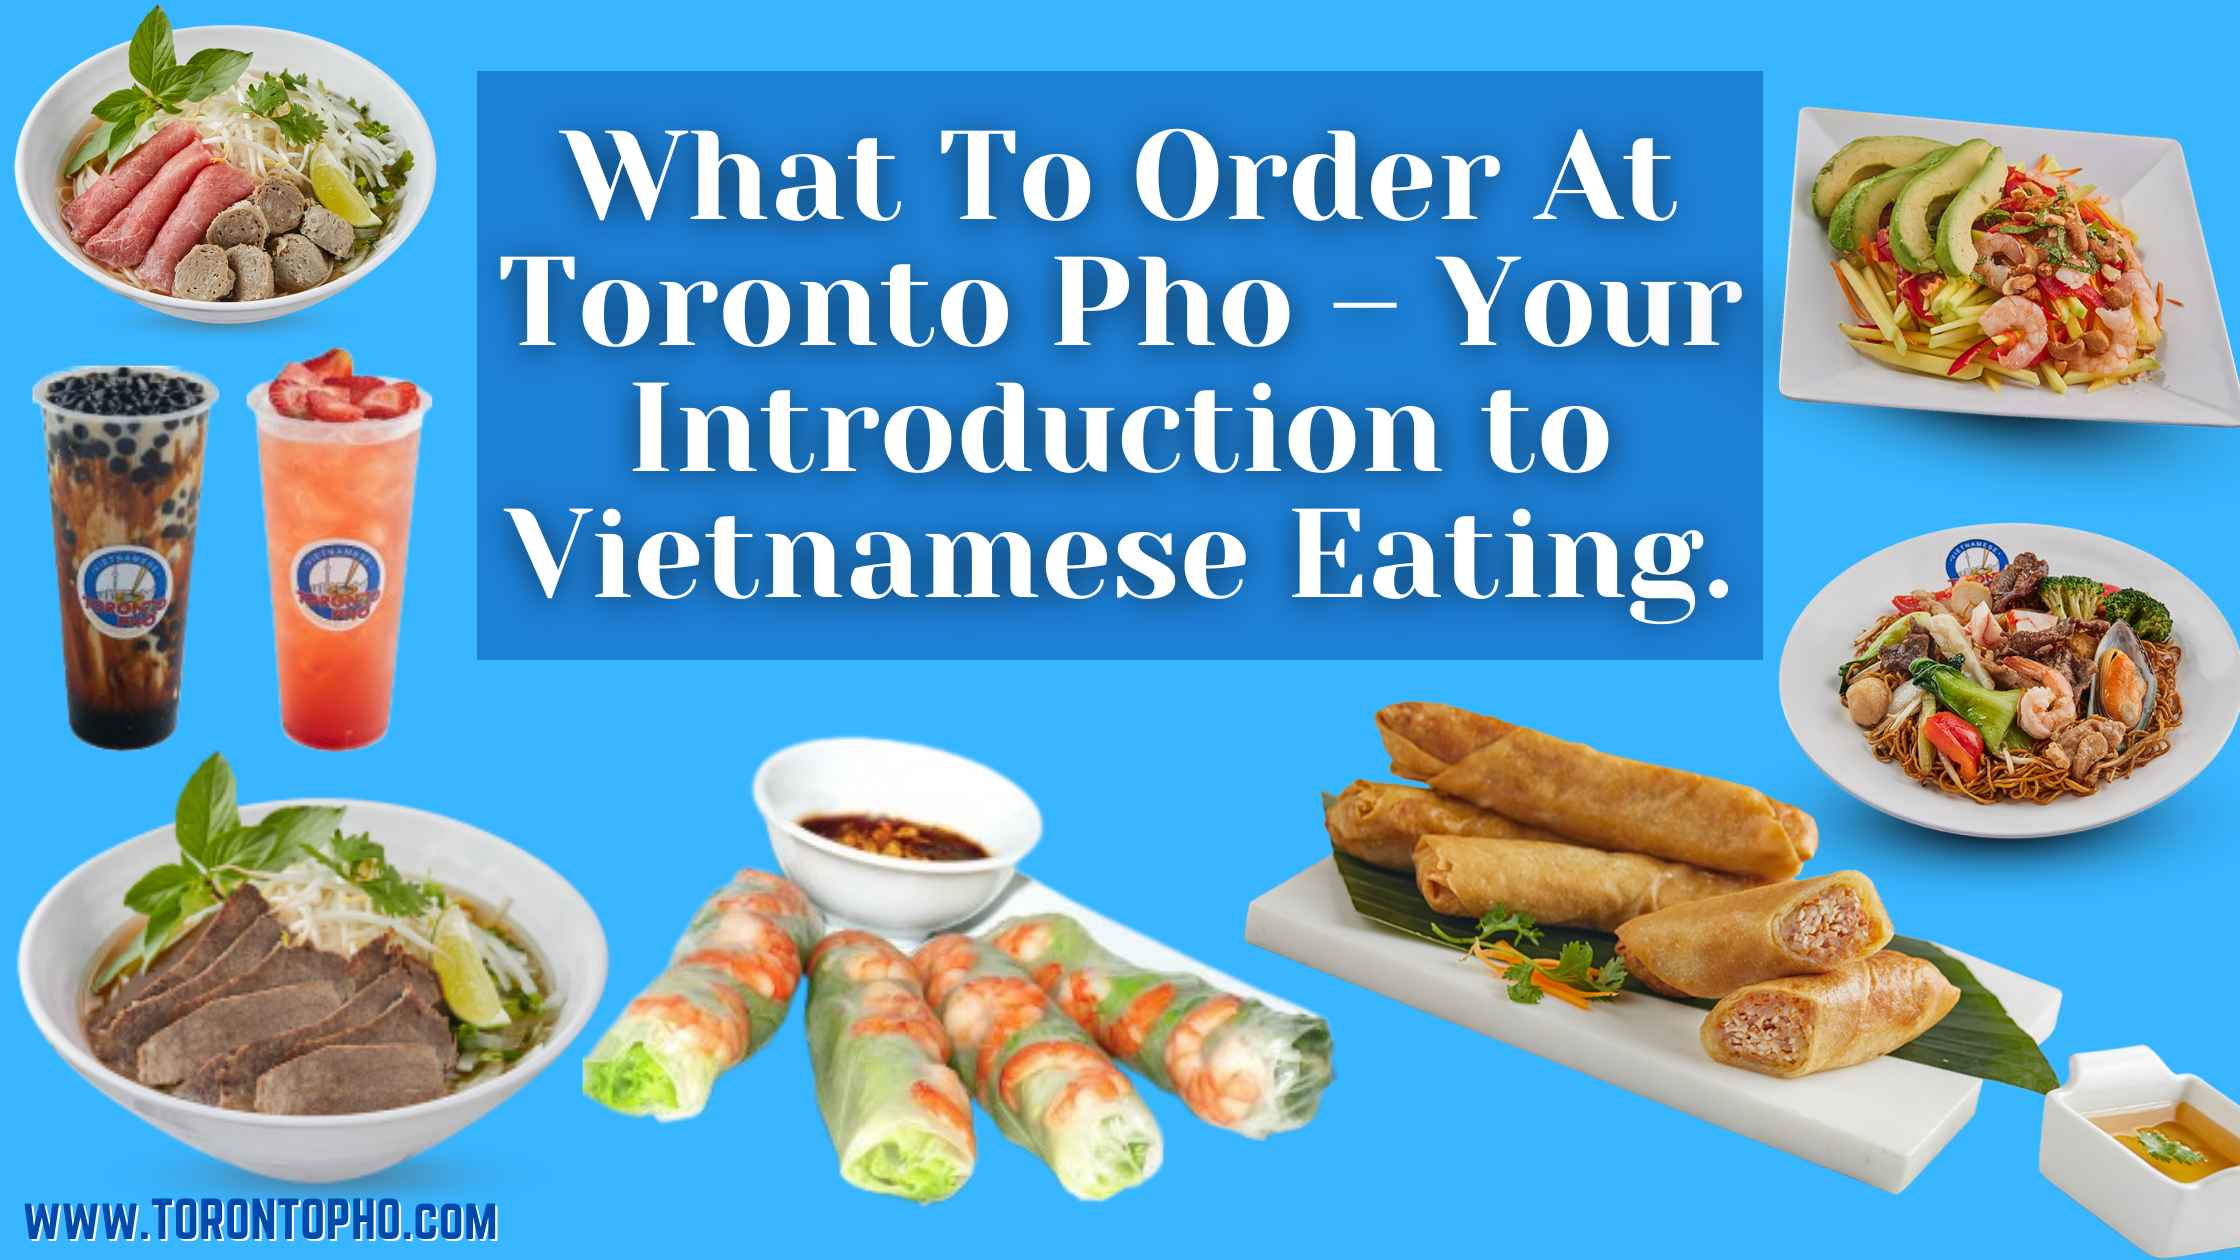 What To Order At Toronto Pho – Your Introduction to Vietnamese Eating